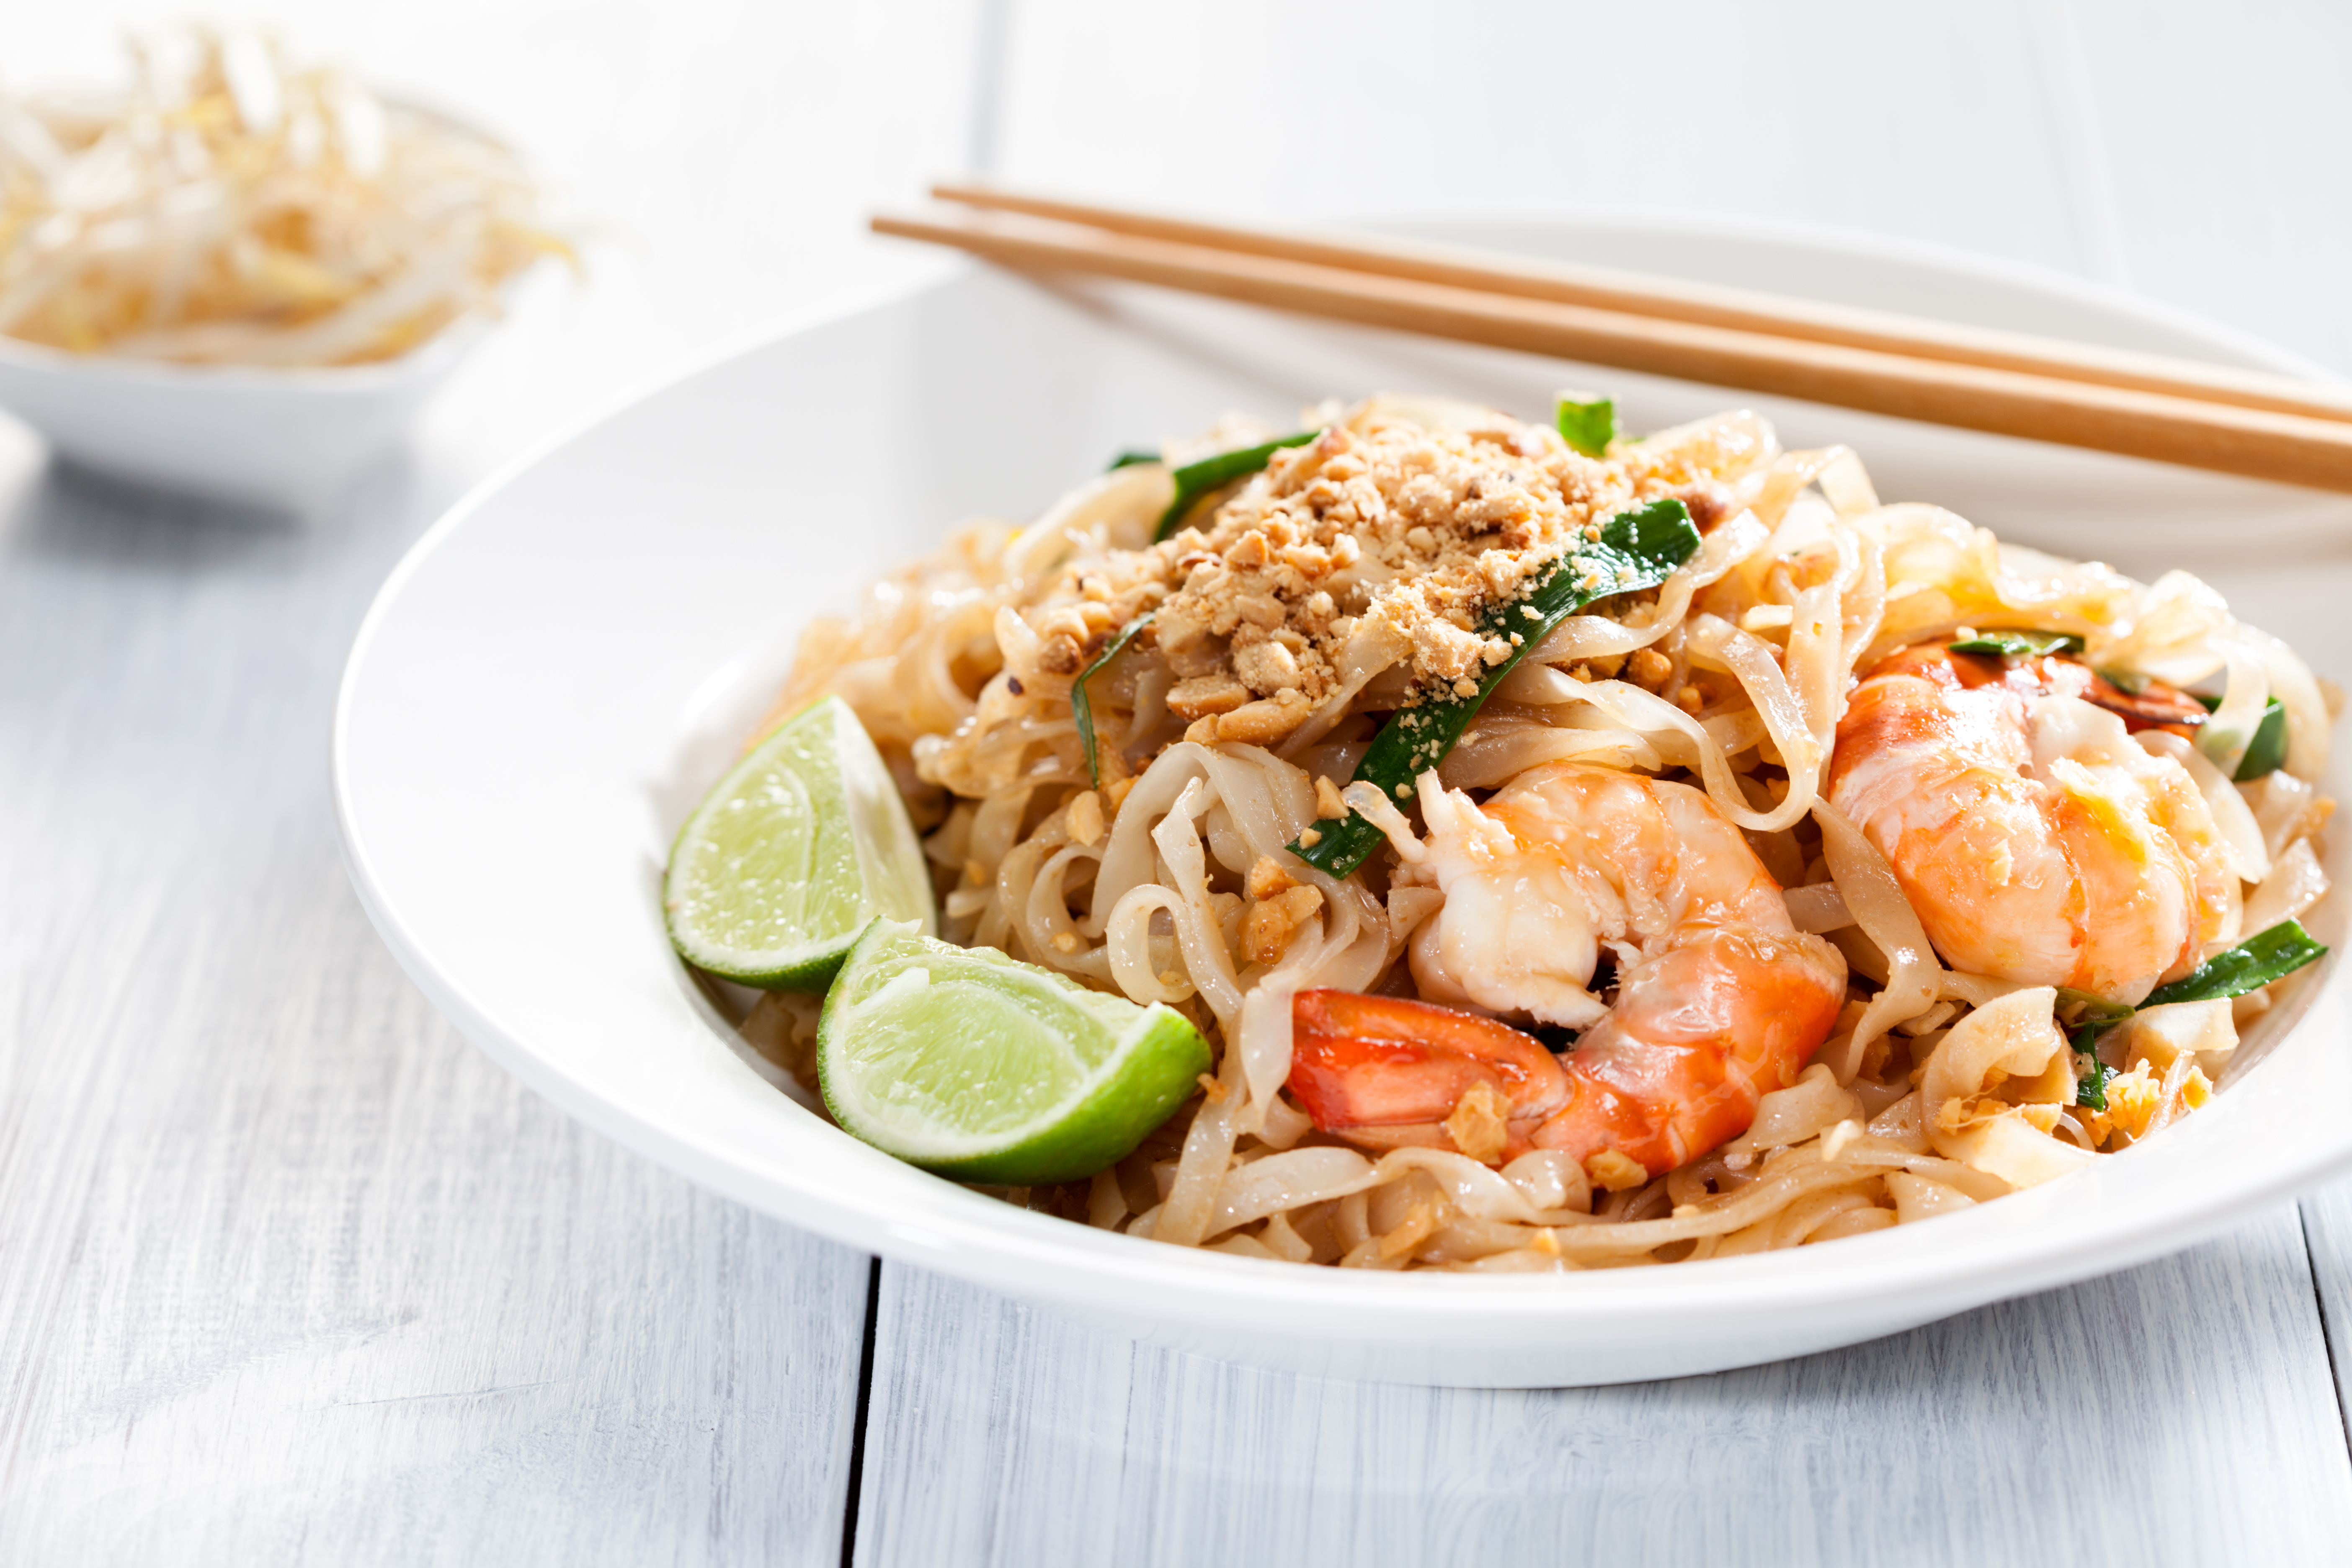 Tips for Cooking and Enjoying Thai Food